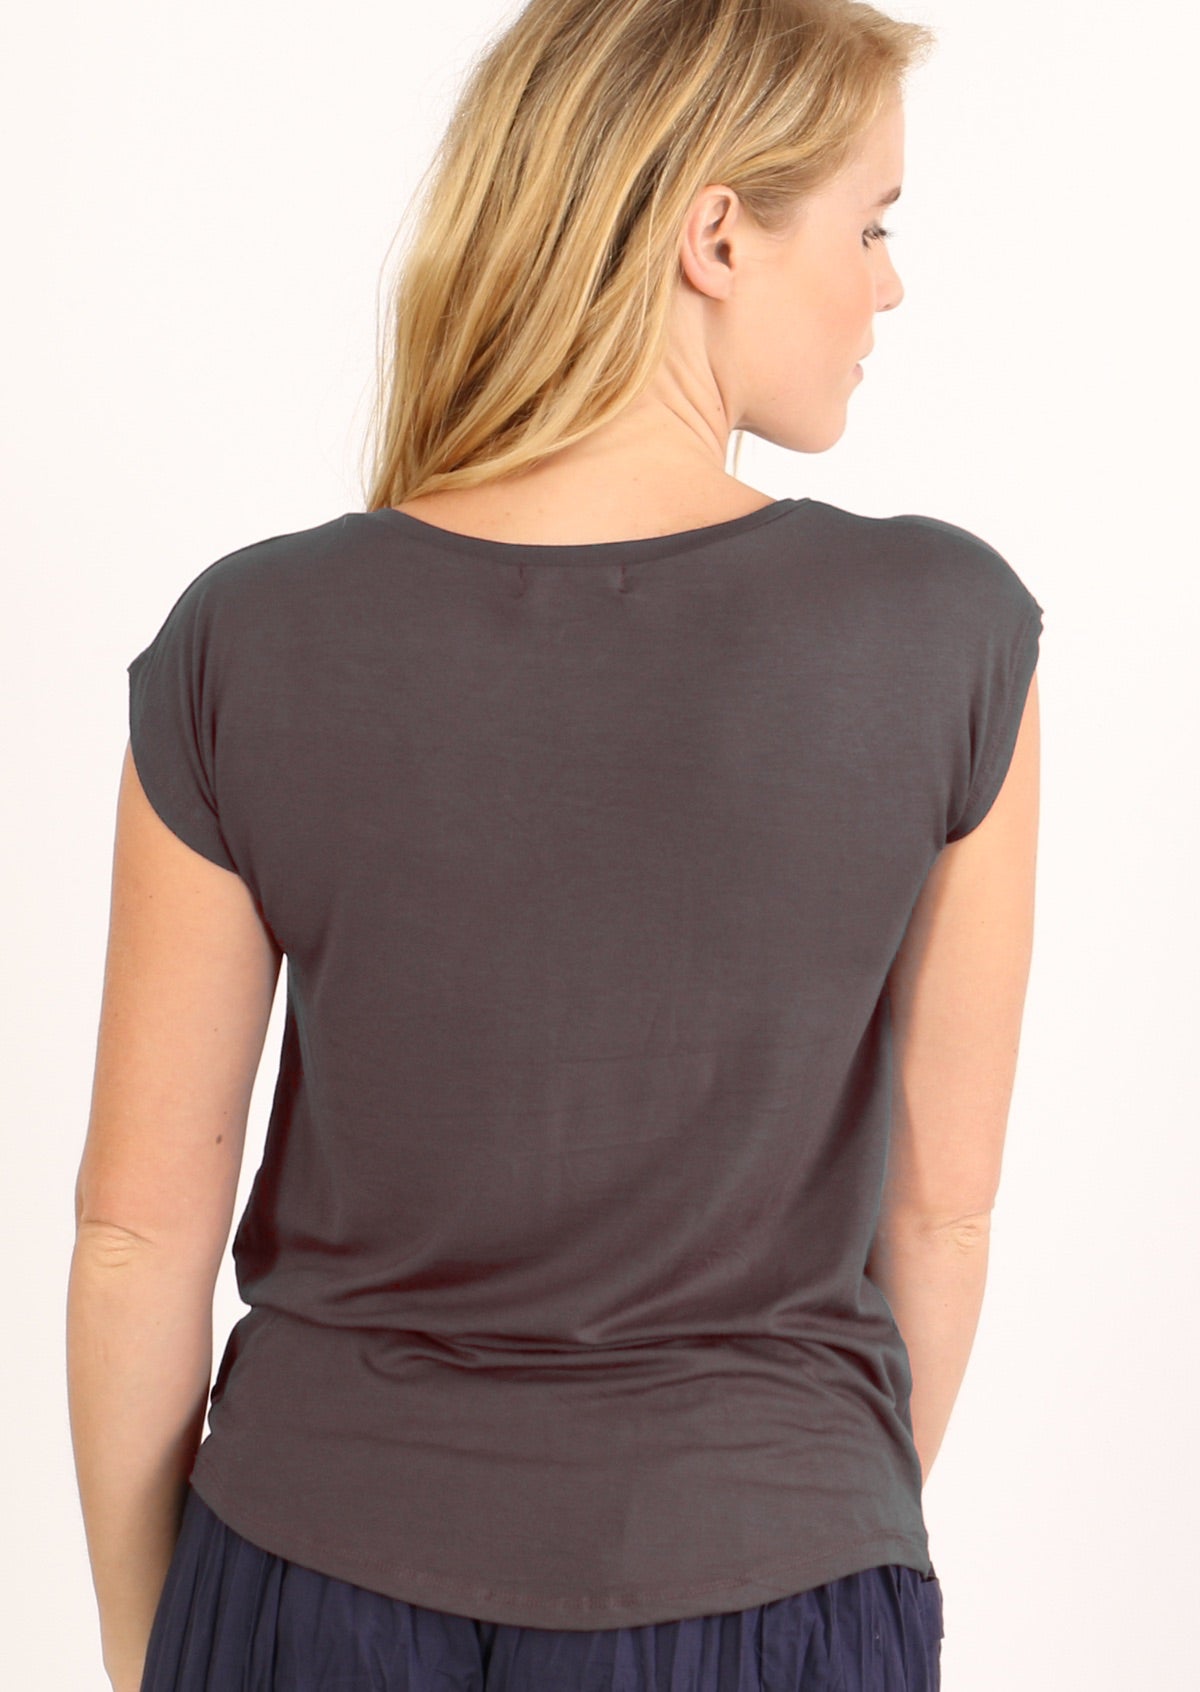 Back view of woman with blonde hair wearing a dark grey v-neck short cap sleeve rayon top